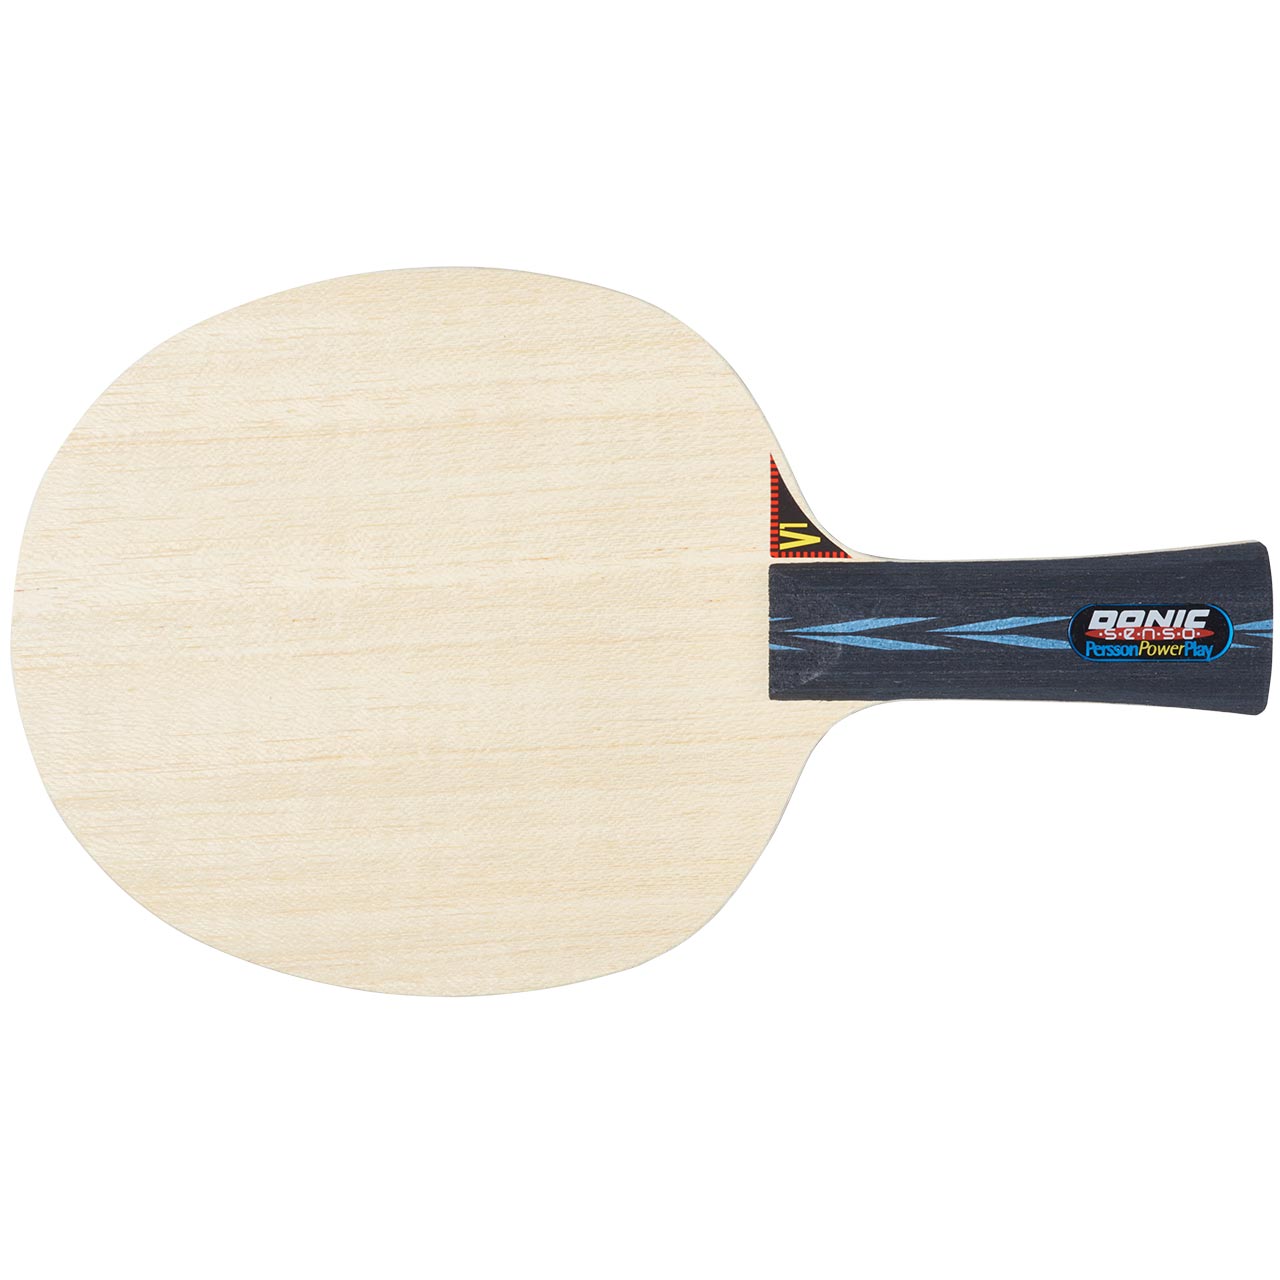 Tischtennis Holz DONIC Persson Powerplay Senso V1 02